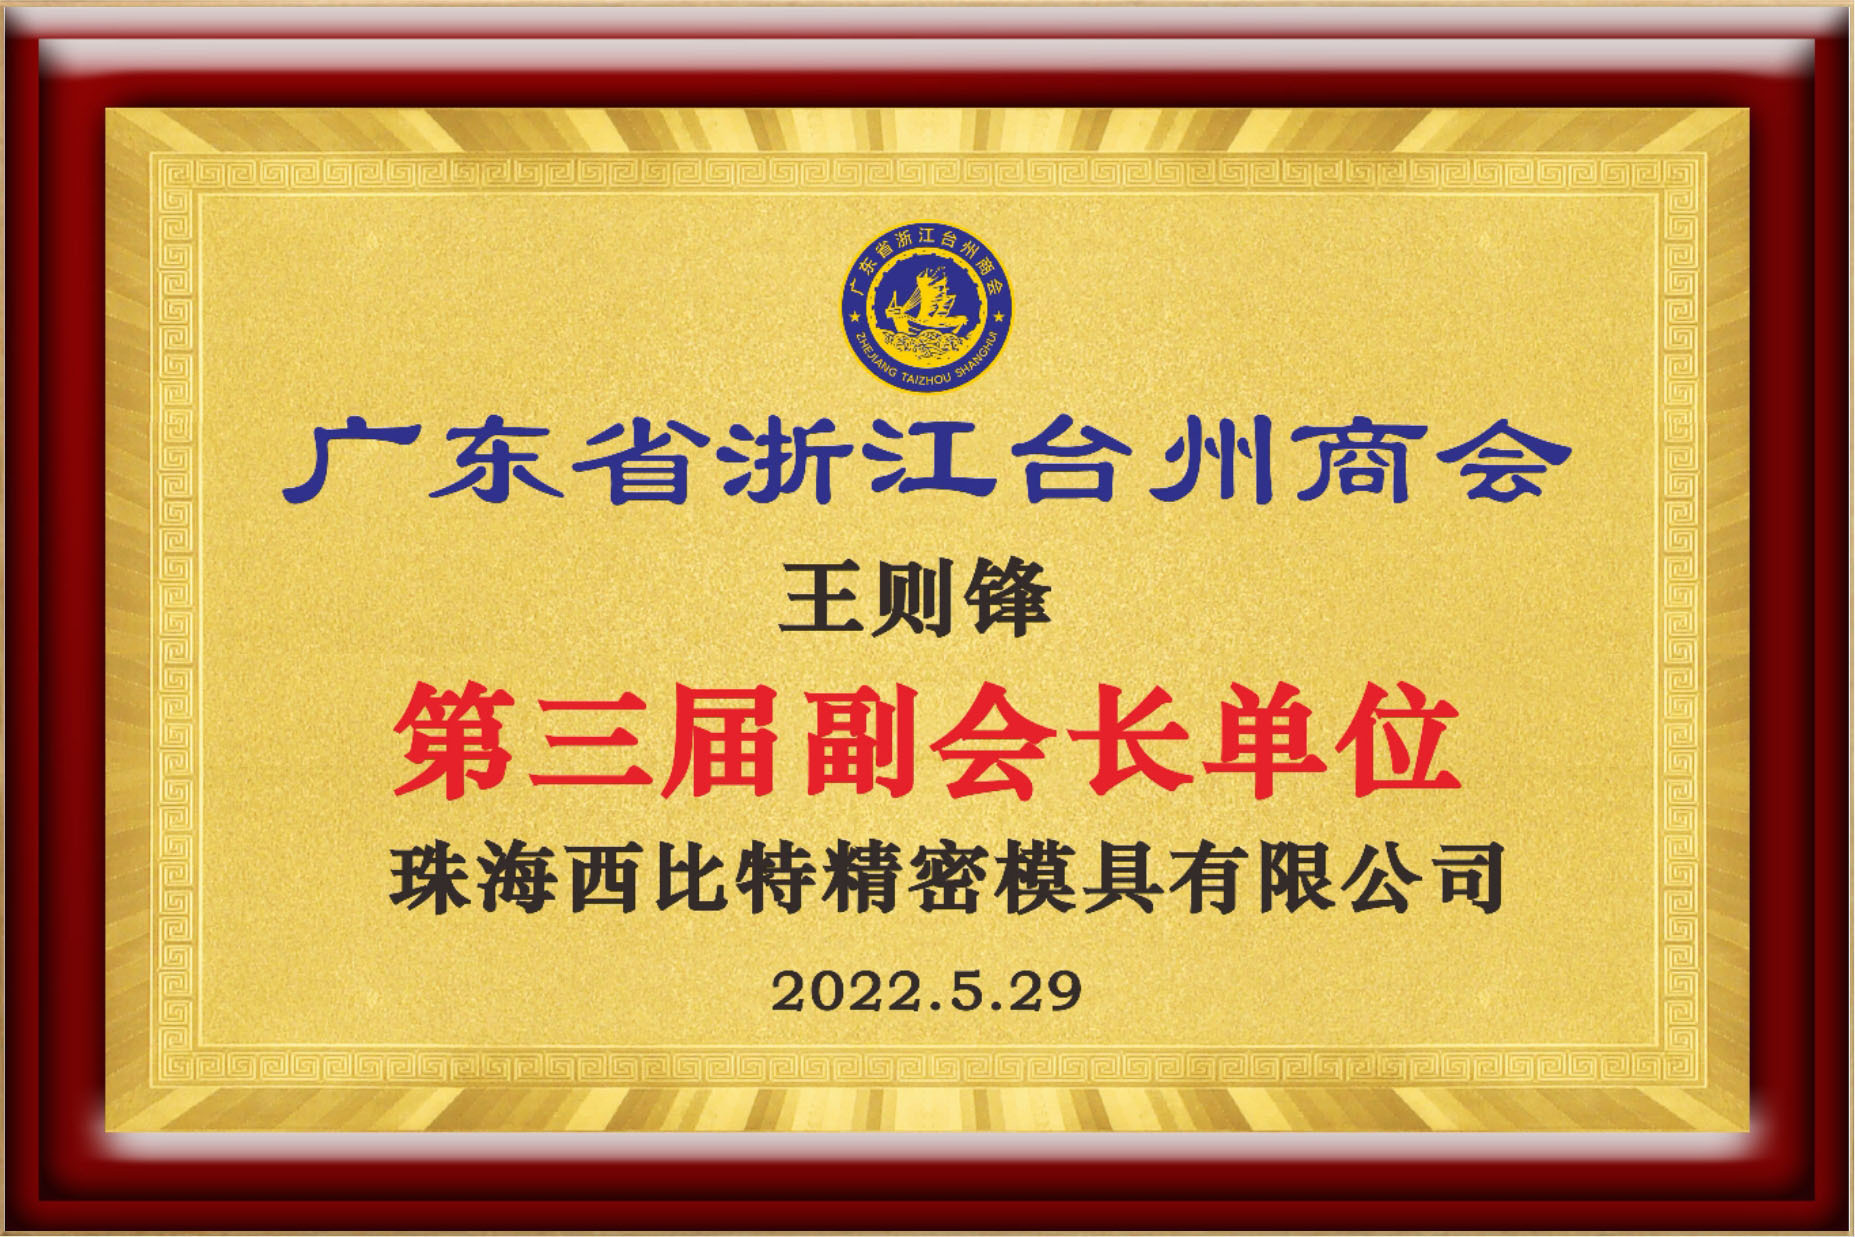 Vice President Unit of the 3rd Zhejiang Taizhou Chamber of Commerce in Guangdong Province